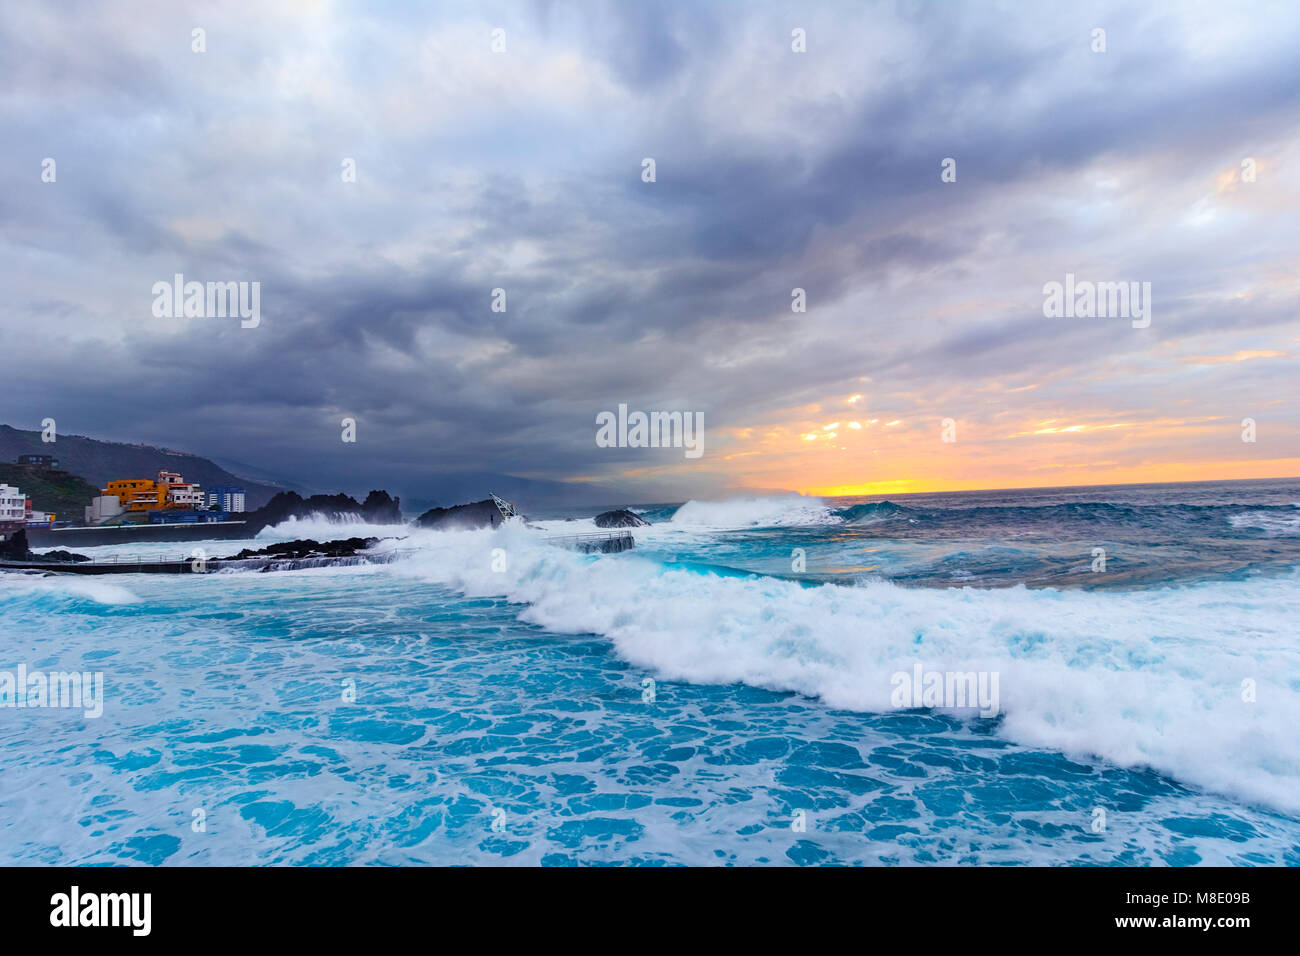 Tenerife, Canary islands, Spain: Sun setting on the Atlantic Ocean on a stormy weather Stock Photo